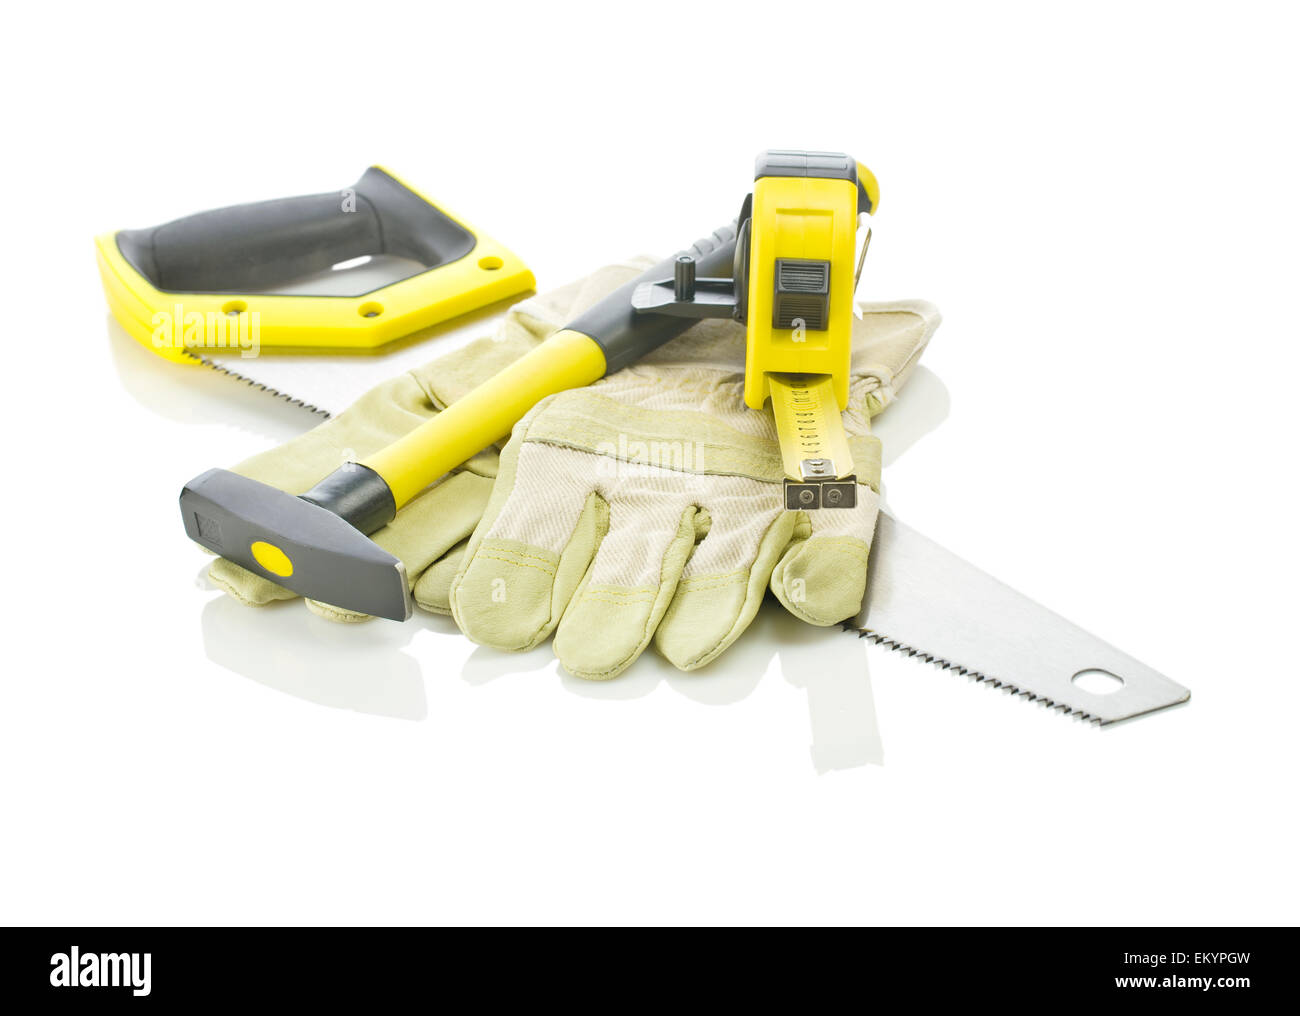 tapeline, hammer and gloves on saw Stock Photo